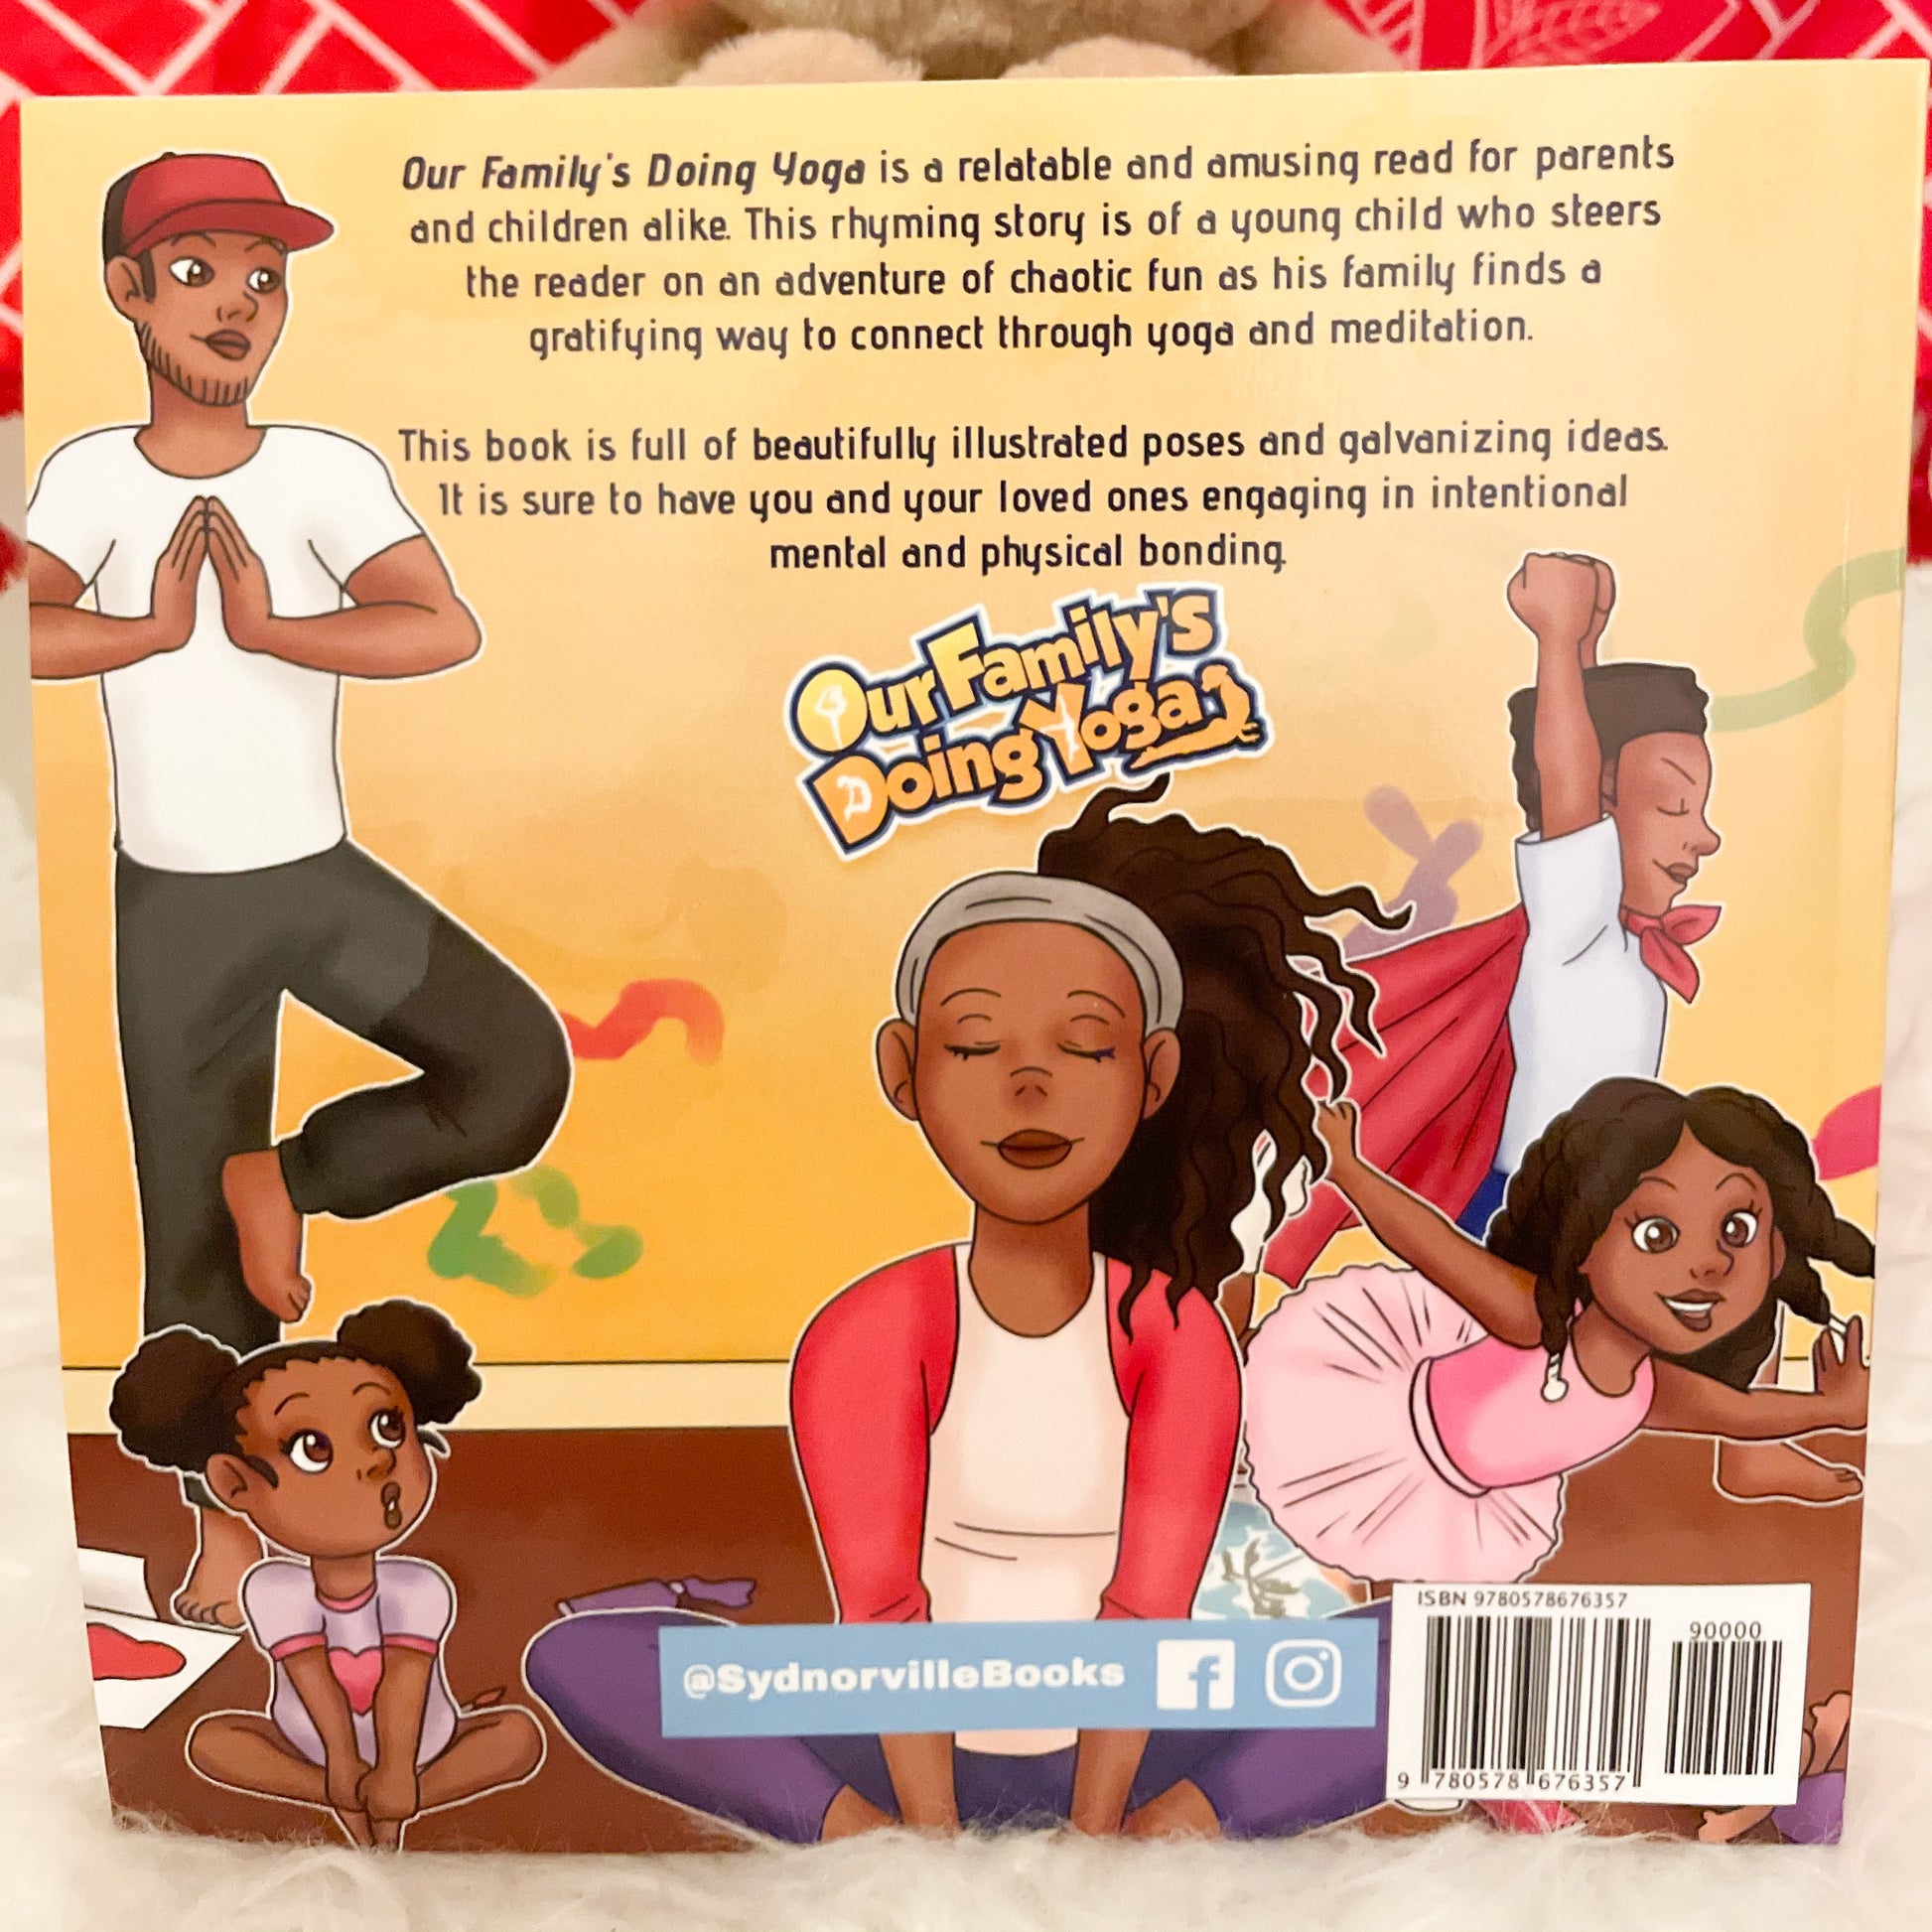 Written by SonJoria Sydnor & illustrated by DG